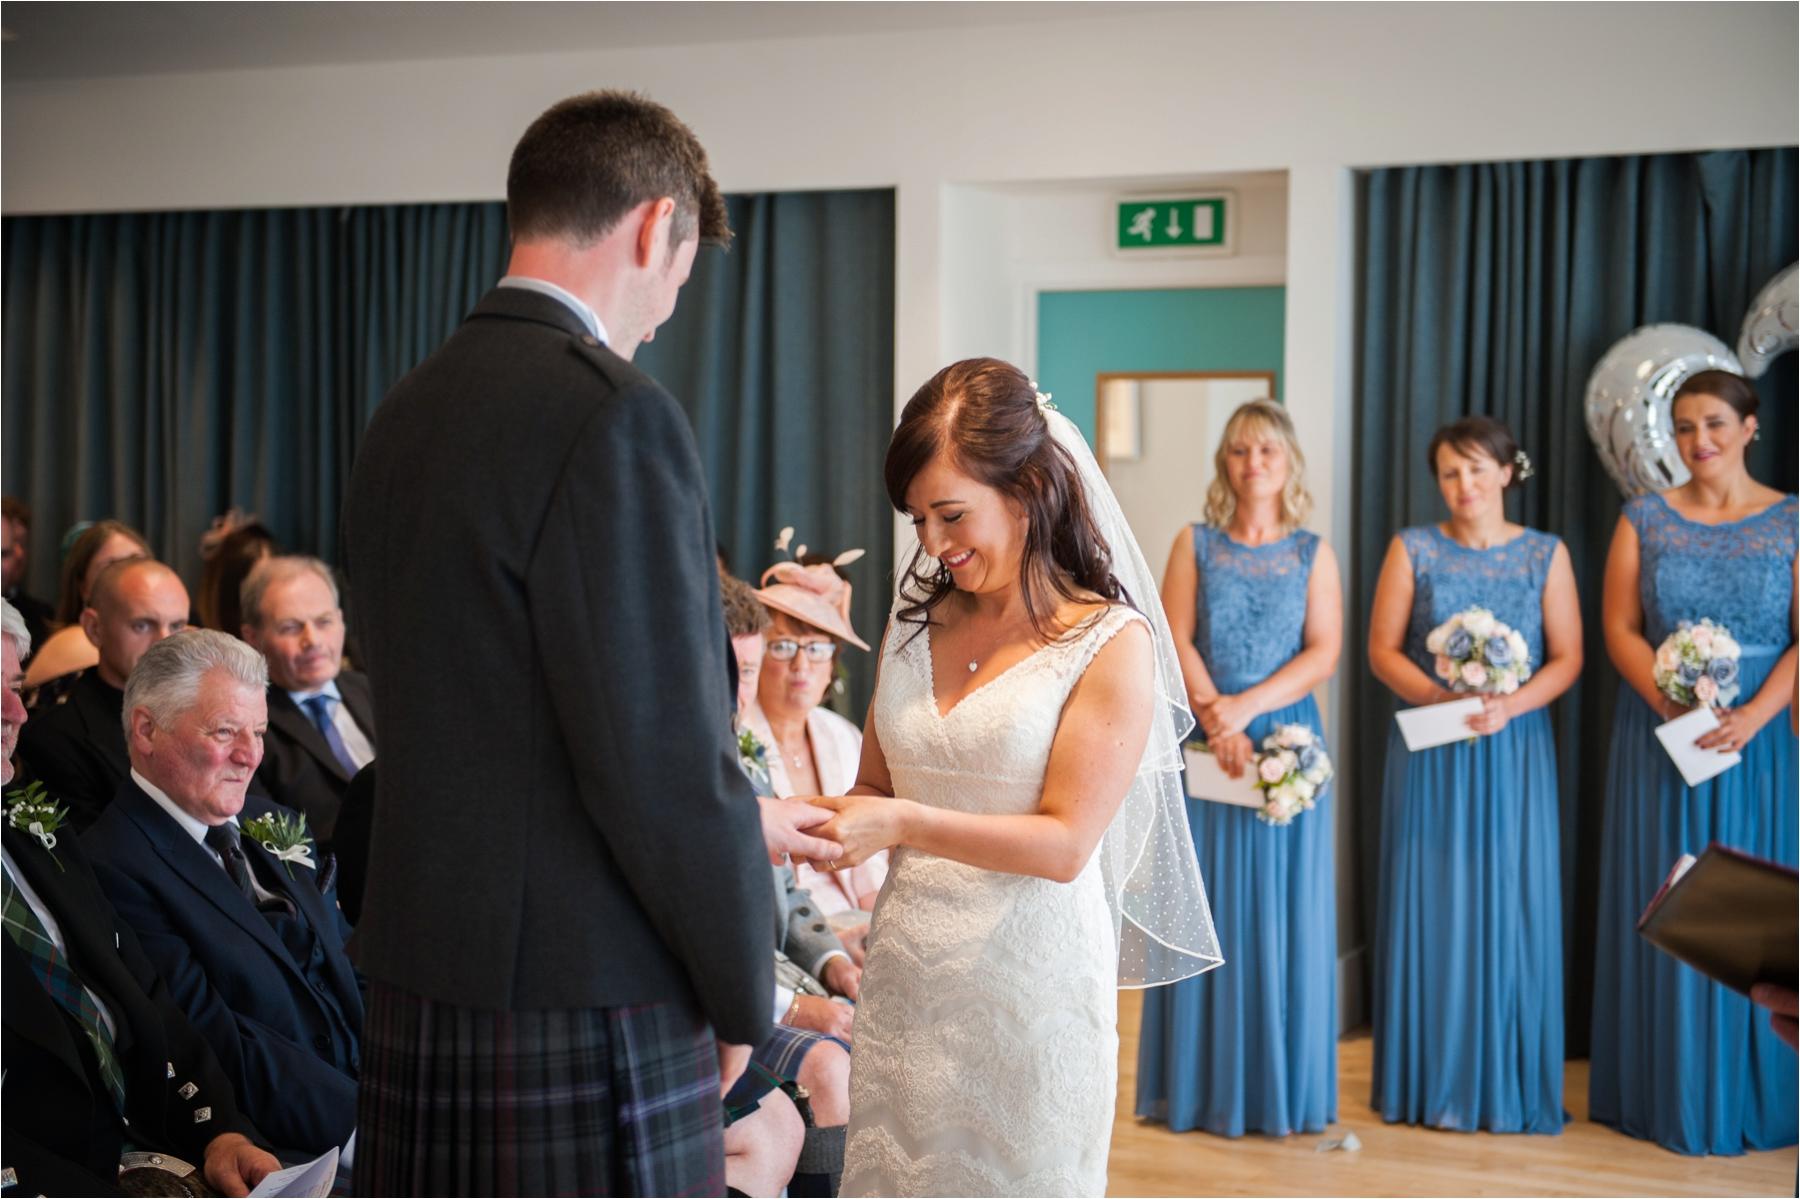 A bride and groom exchange rings during their humanist wedding ceremony on the Isle of Harris. Photographer: Margaret Soraya